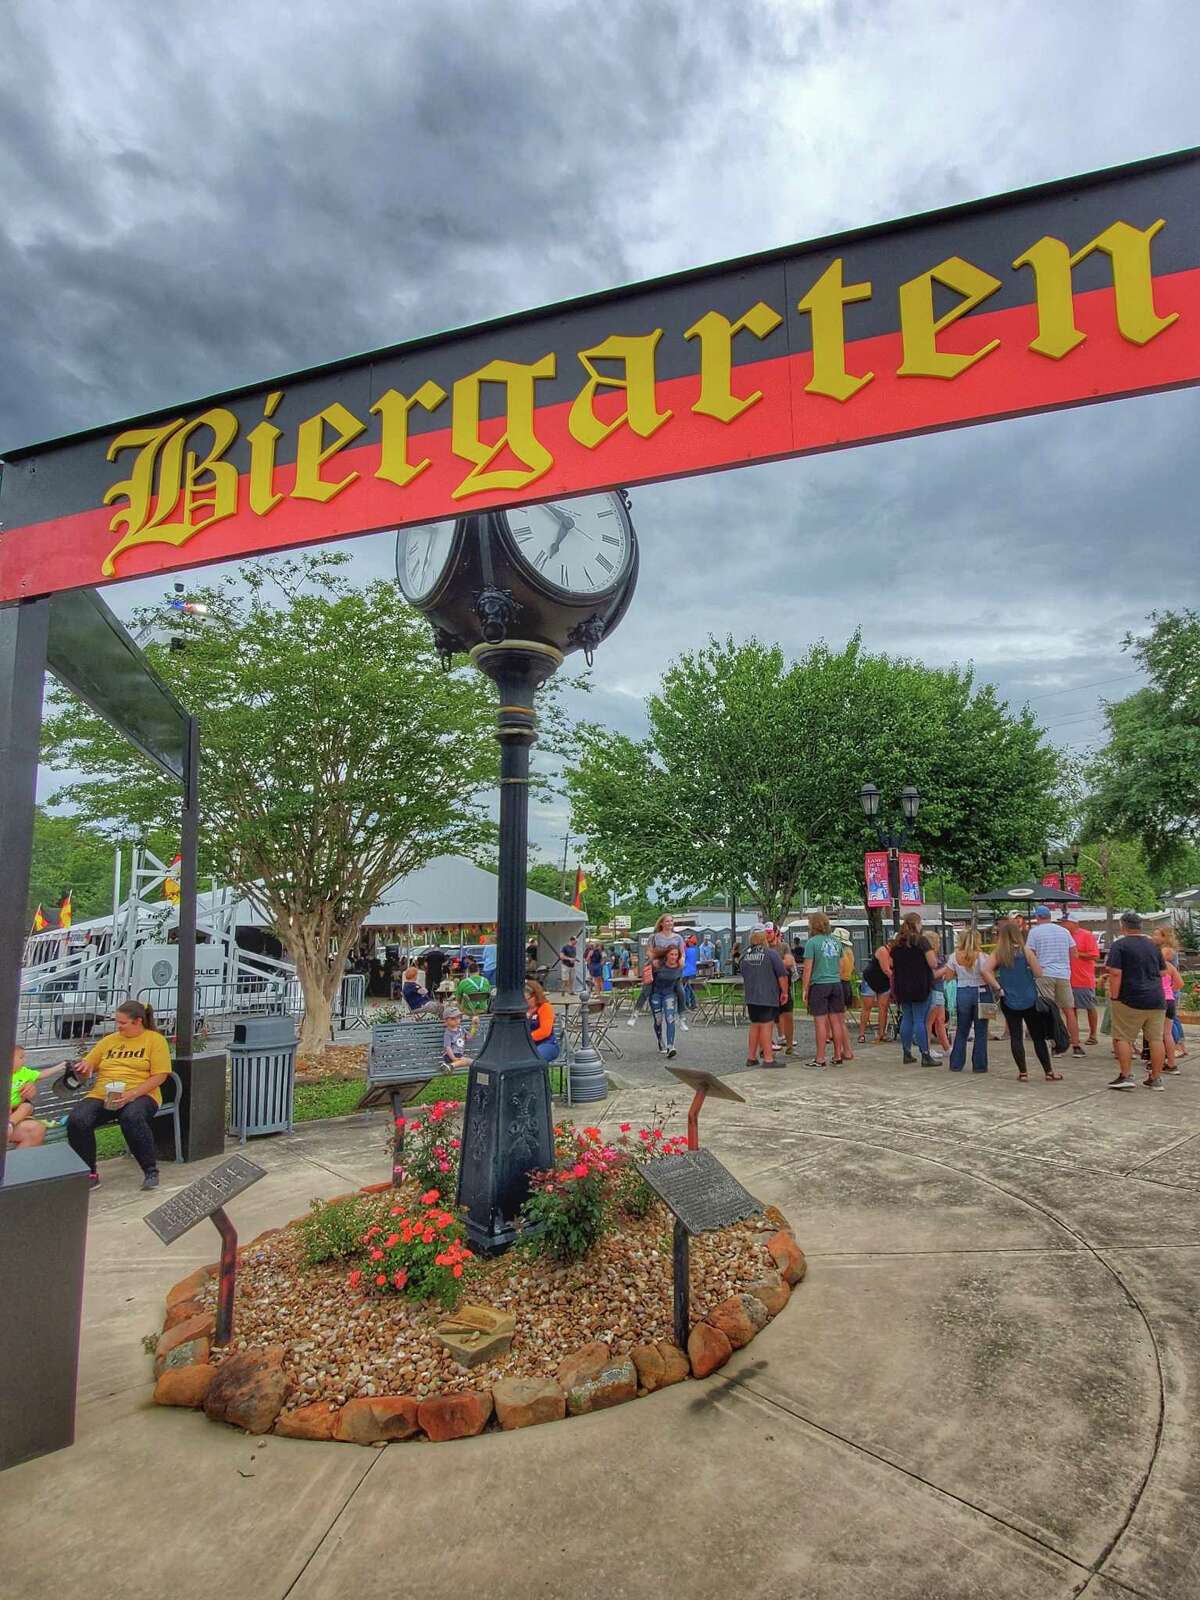 See scenes from this year’s Tomball German Heritage Festival